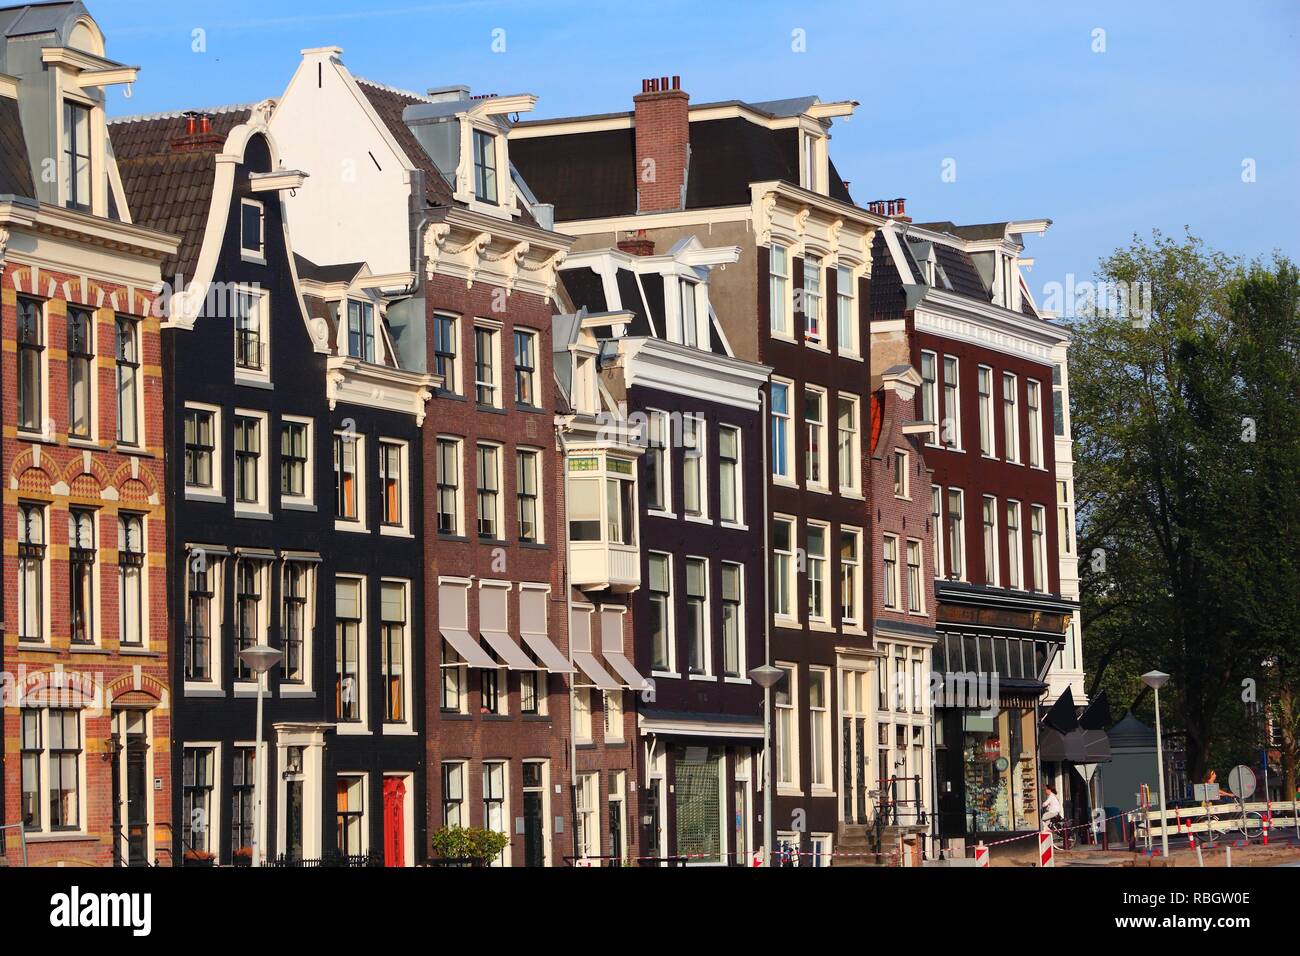 Amsterdam city architecture - Prinsengracht residential buildings. Netherlands rowhouse. Stock Photo